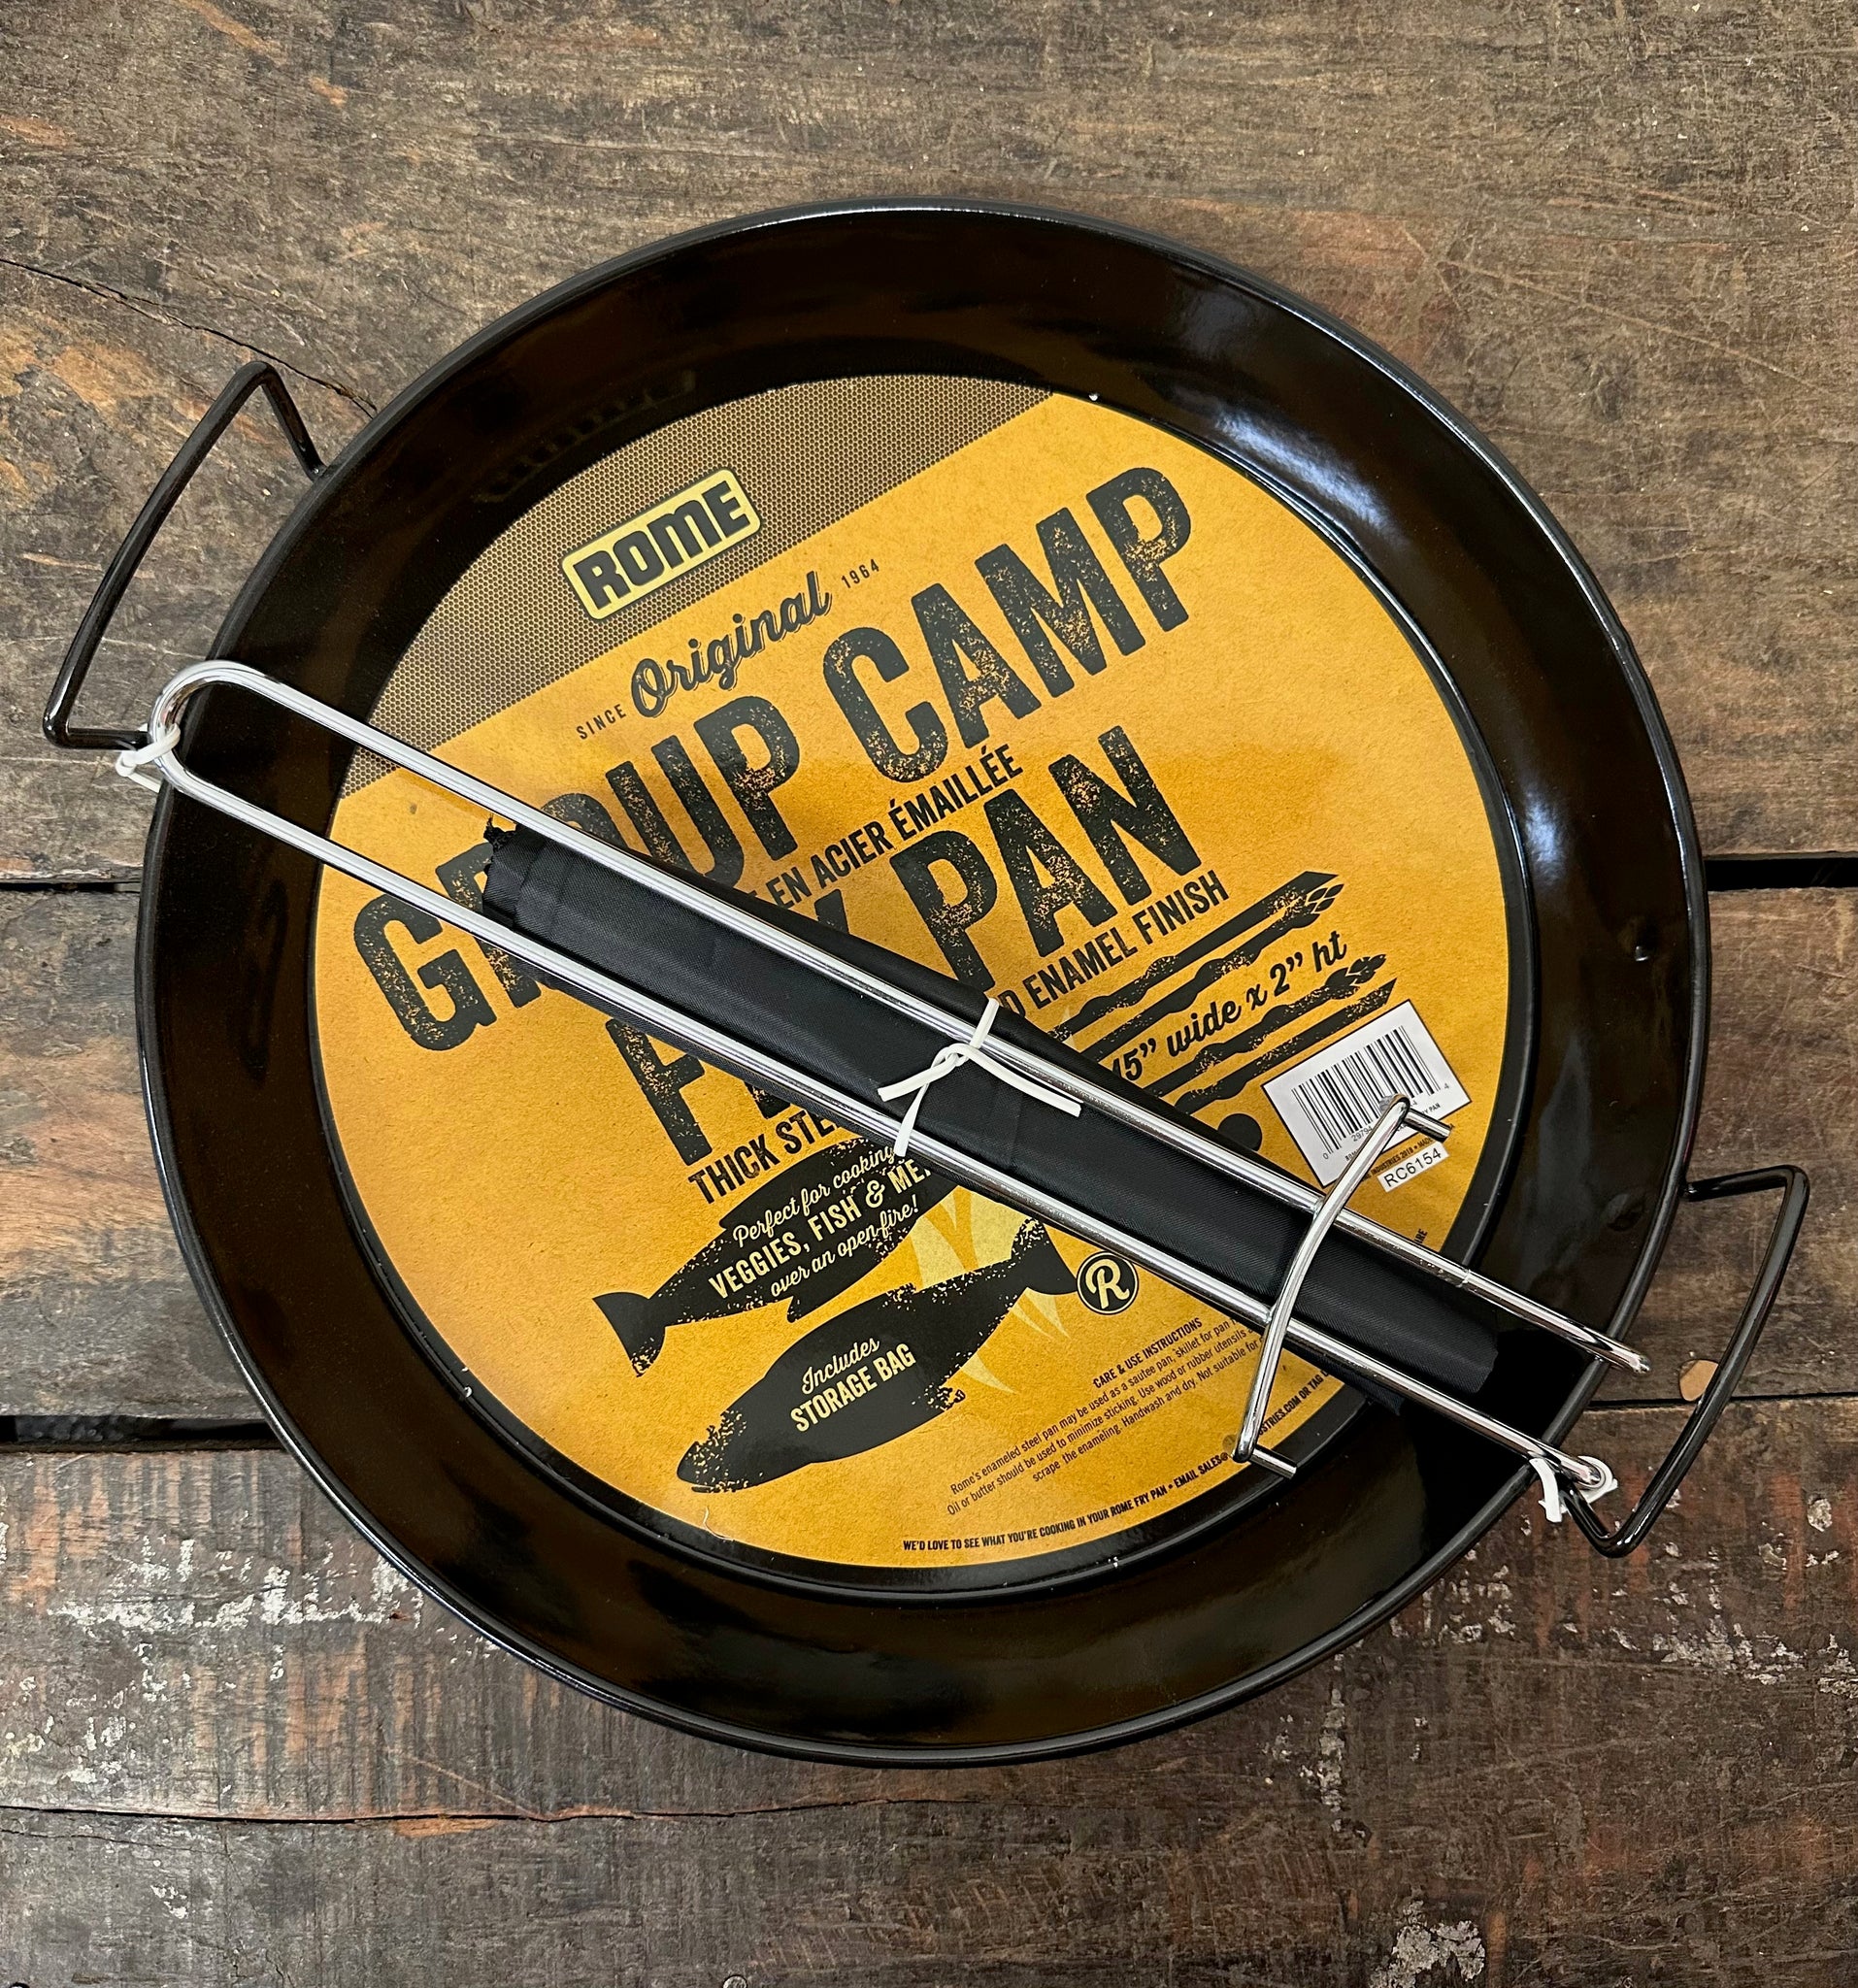 L&G Cold Handle #49 6 Campfire Camping Frying Pan